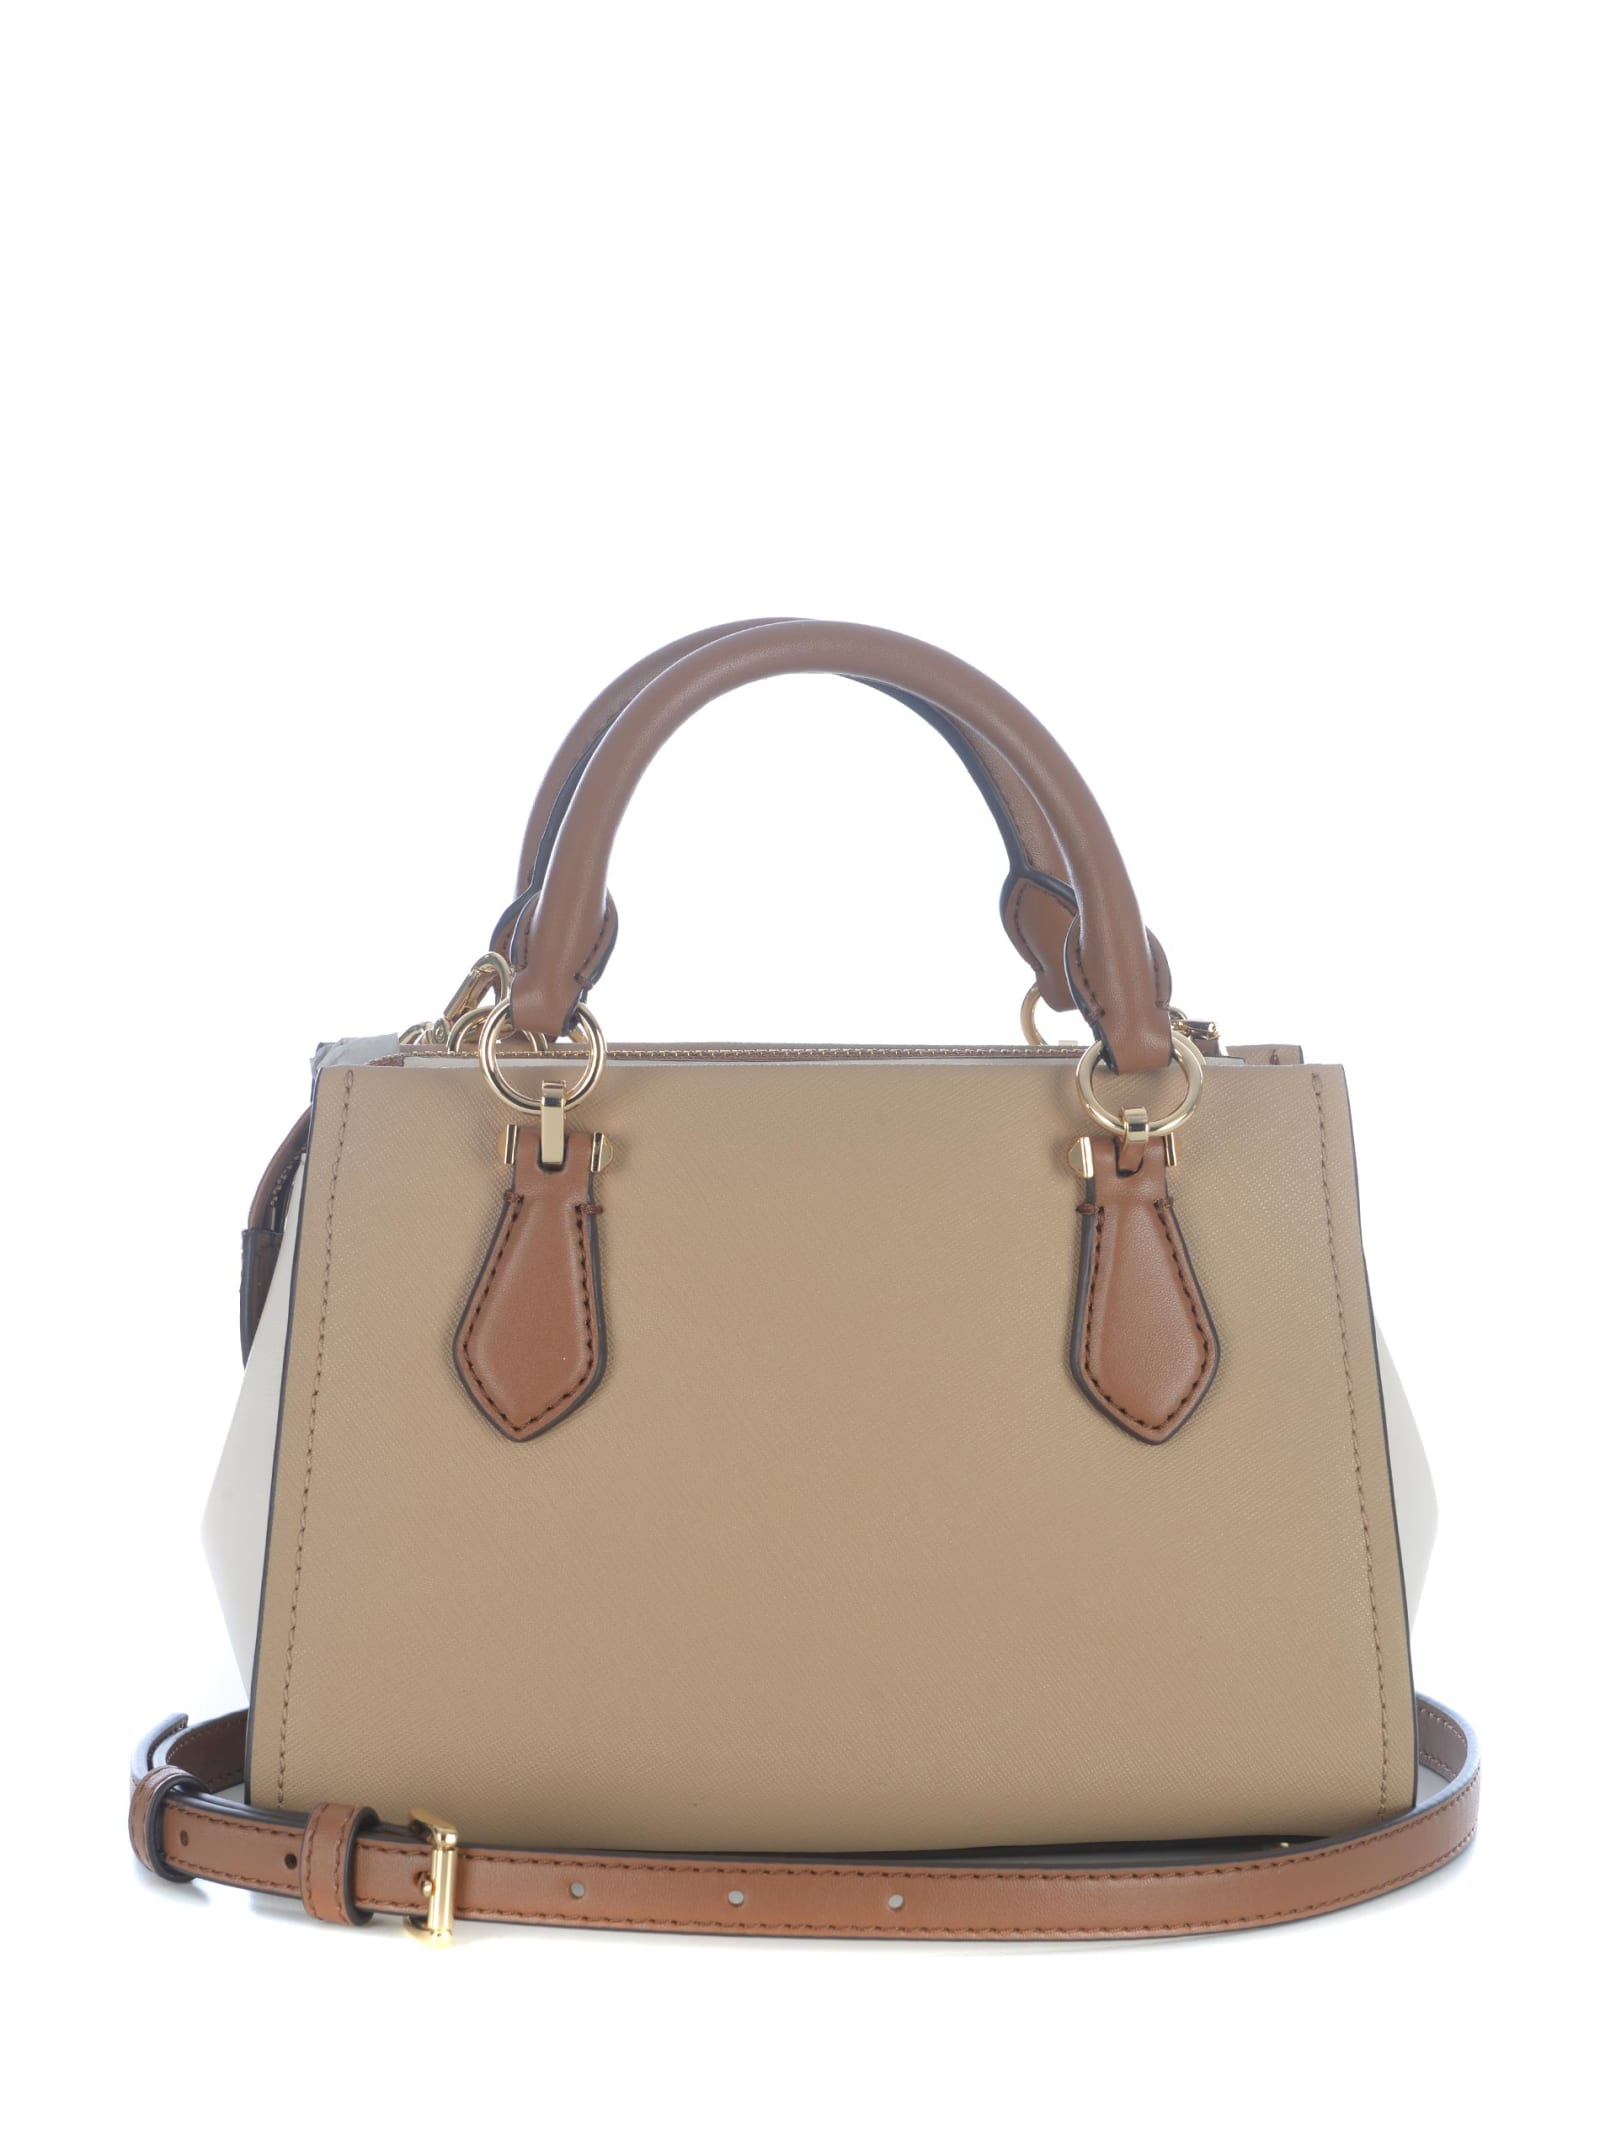 Michael Kors Marilyn Small Saffiano Leather Crossbody Bag in Brown - One Size by Michael Michael Kors - Mk Purse